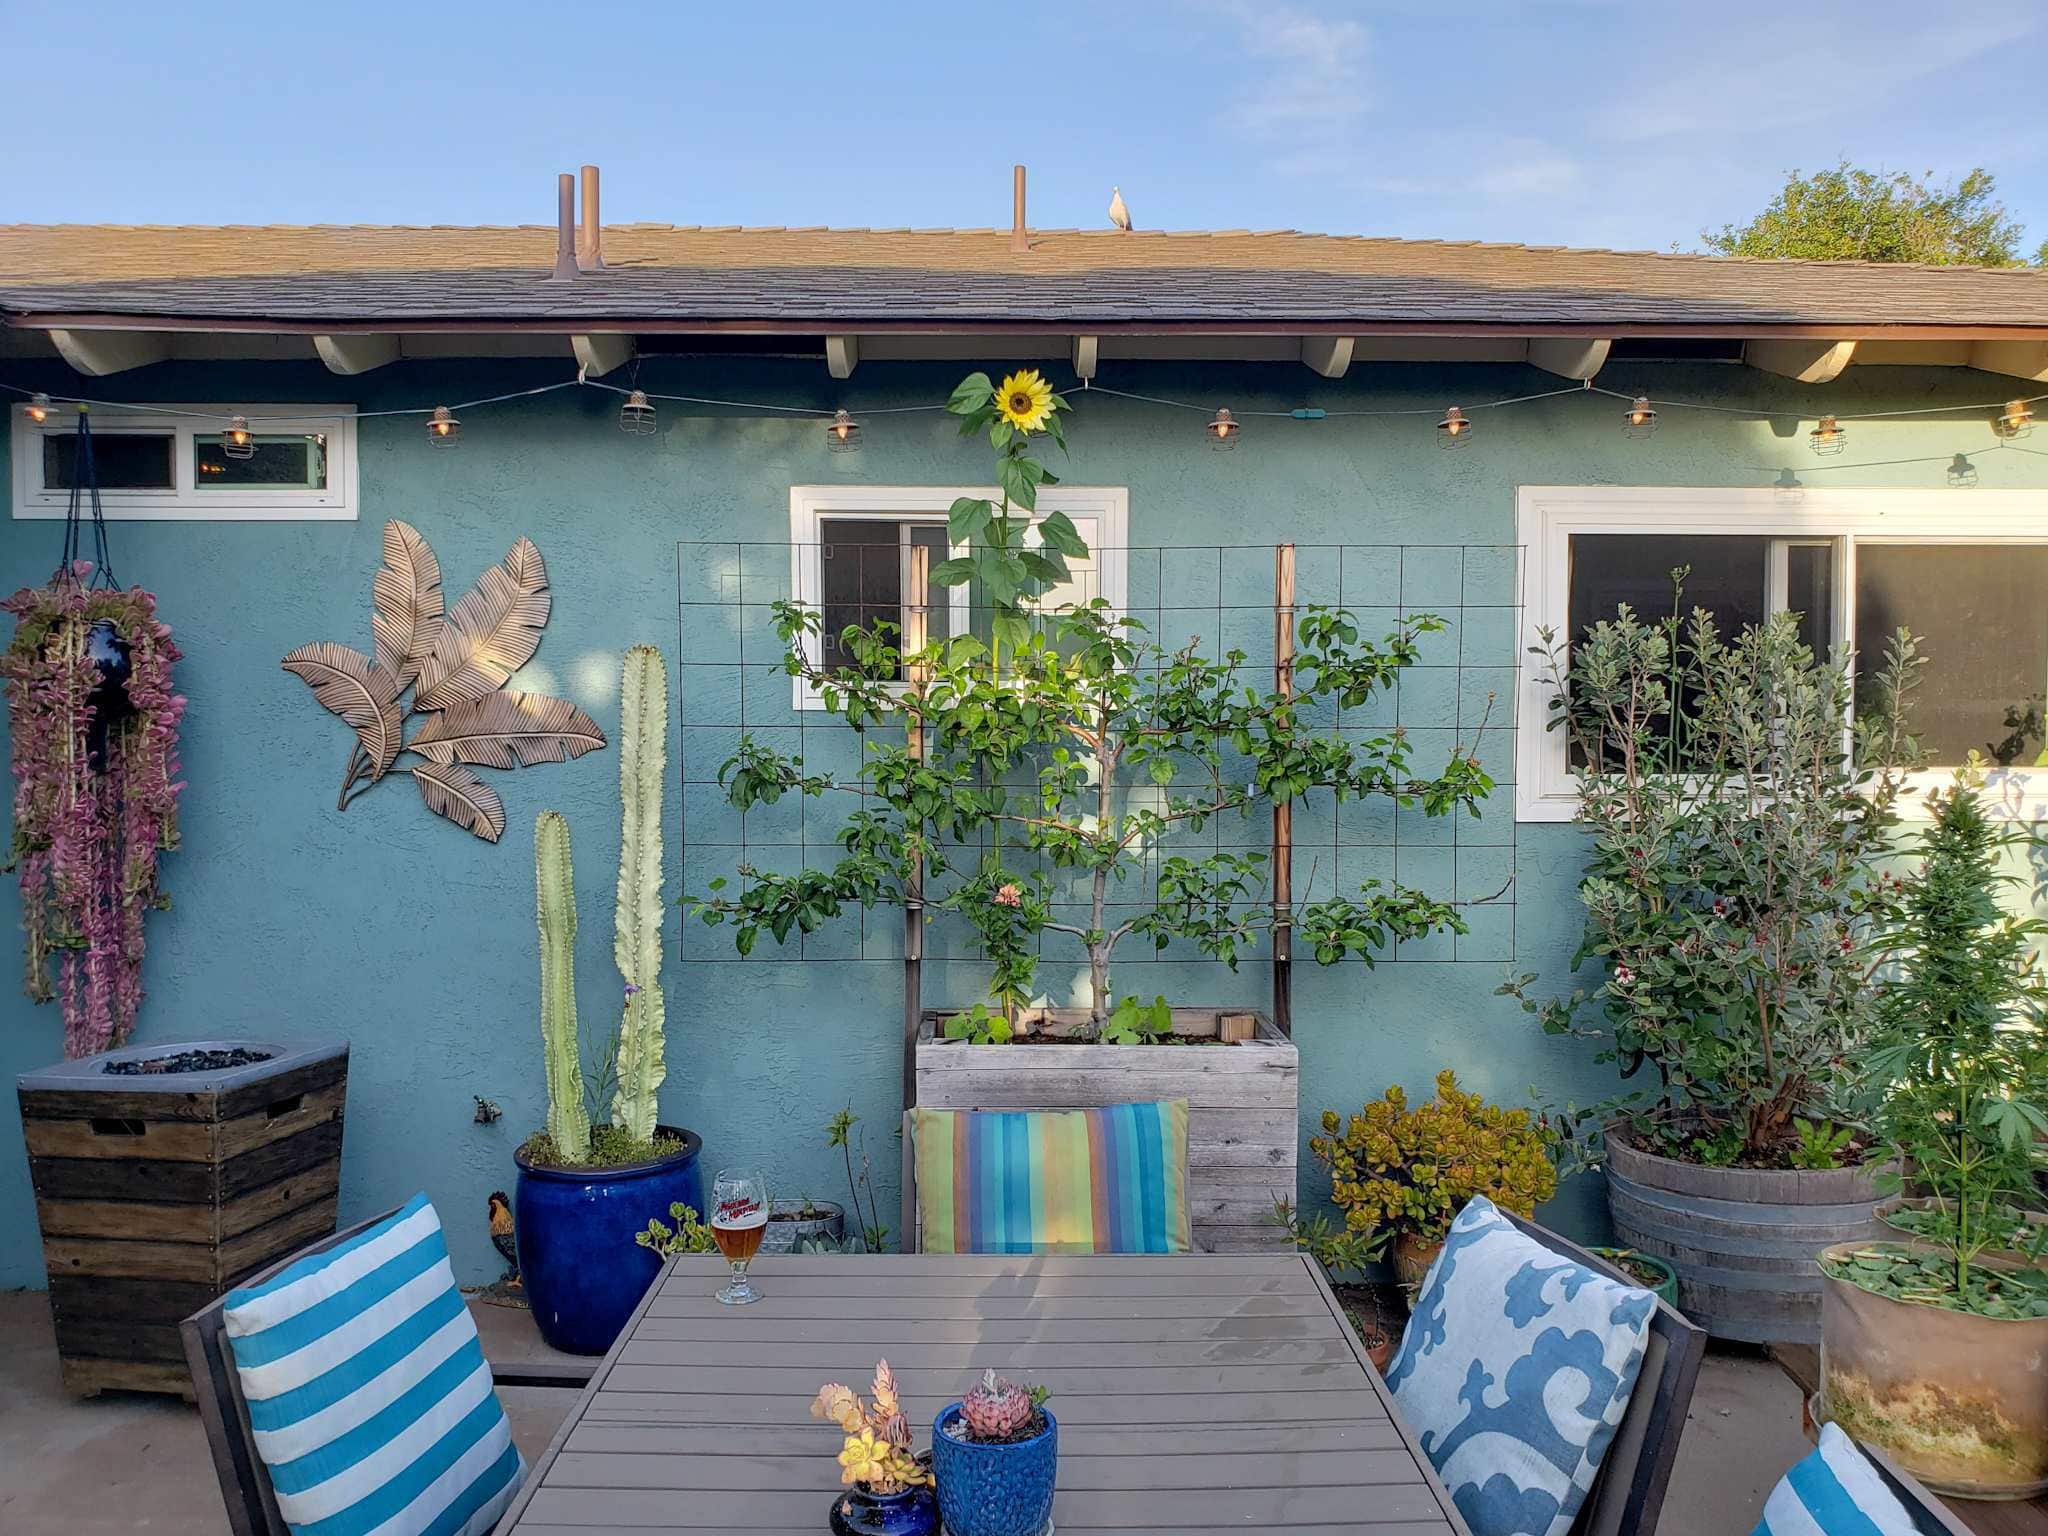 The backyard patio with the side of a house which is sea green/blue in color set as the backdrop. There is a Fuji apple tree that is the center forefront of the photo in a raised wooden planter container, the tree is in an espalier shape with three limbs extending out in even dimensions on both sides of the main trunk. There are also various potted plants throughout the patio, from jades to cacti to a pineapple guava (feijoa) that is planted in a half wine barrel. There is also a patio table extending towards the fuji tree from the bottom center of the photo. A raised gas fireplace sits in the left corner.